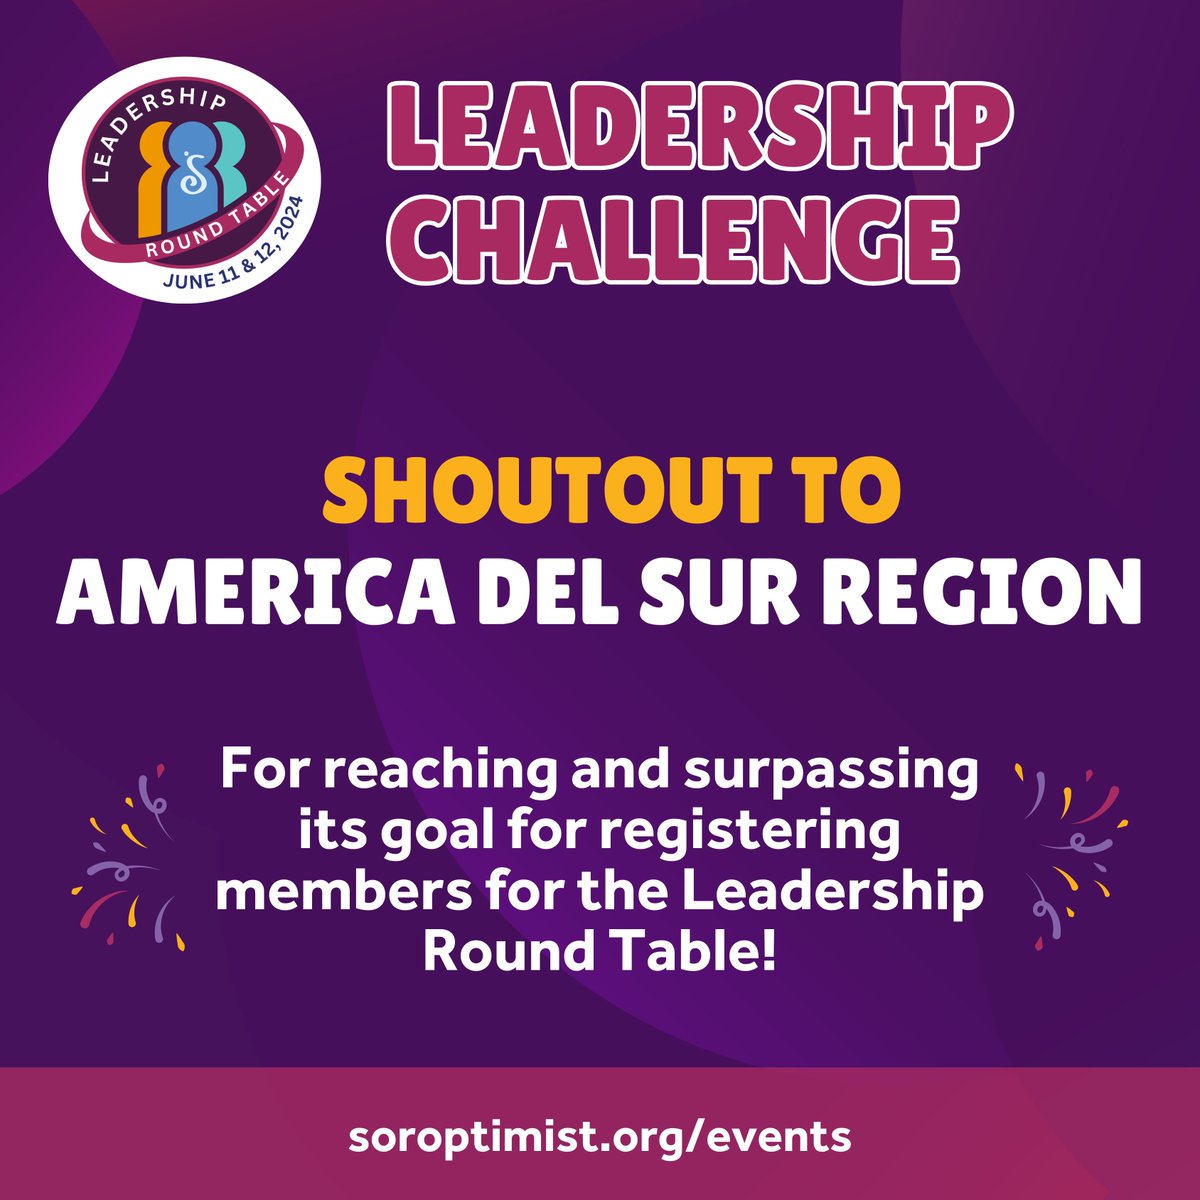 Shoutout to America del Sur Region for reaching and surpassing its goal of registering members for the Leadership Round Table! 🎉 To view details and register, visit soroptimist.org/events/leaders…